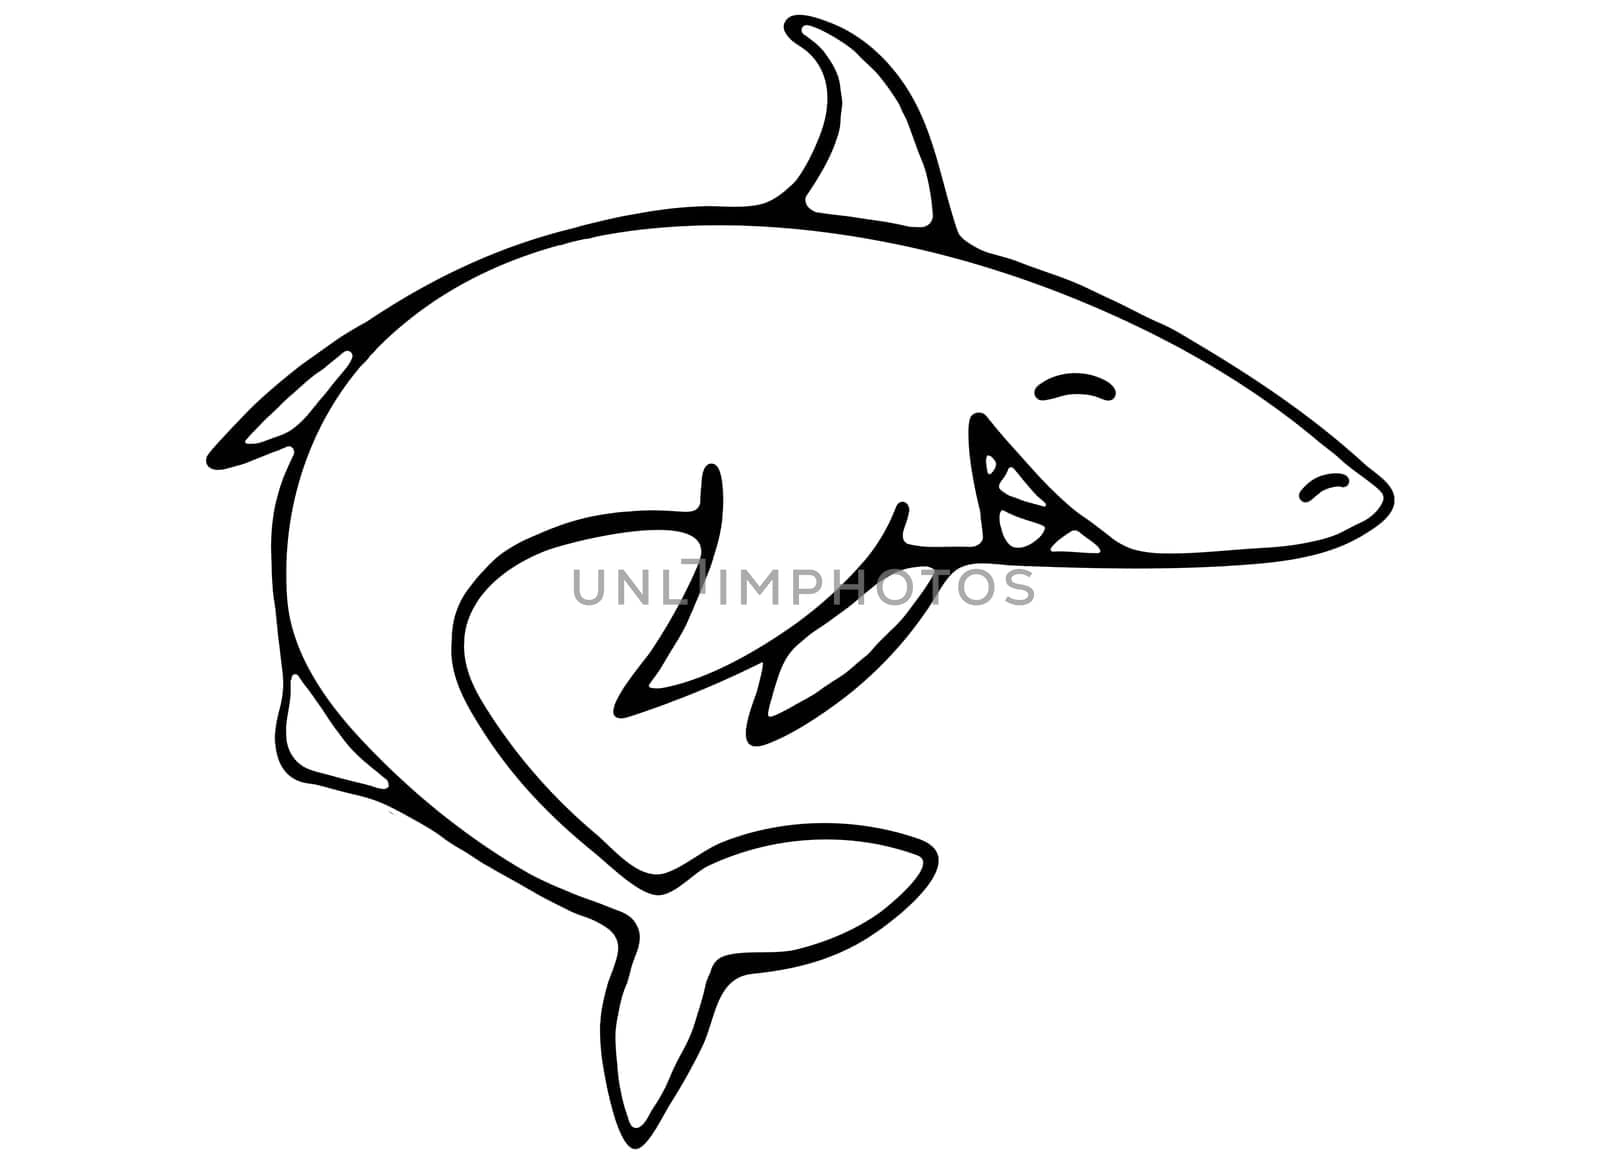 Black and White Shark Illustration Isolated on White Background. Hand Drawn Coloring book with Shark Cartoon Clipart. Coloring Page for Kids.